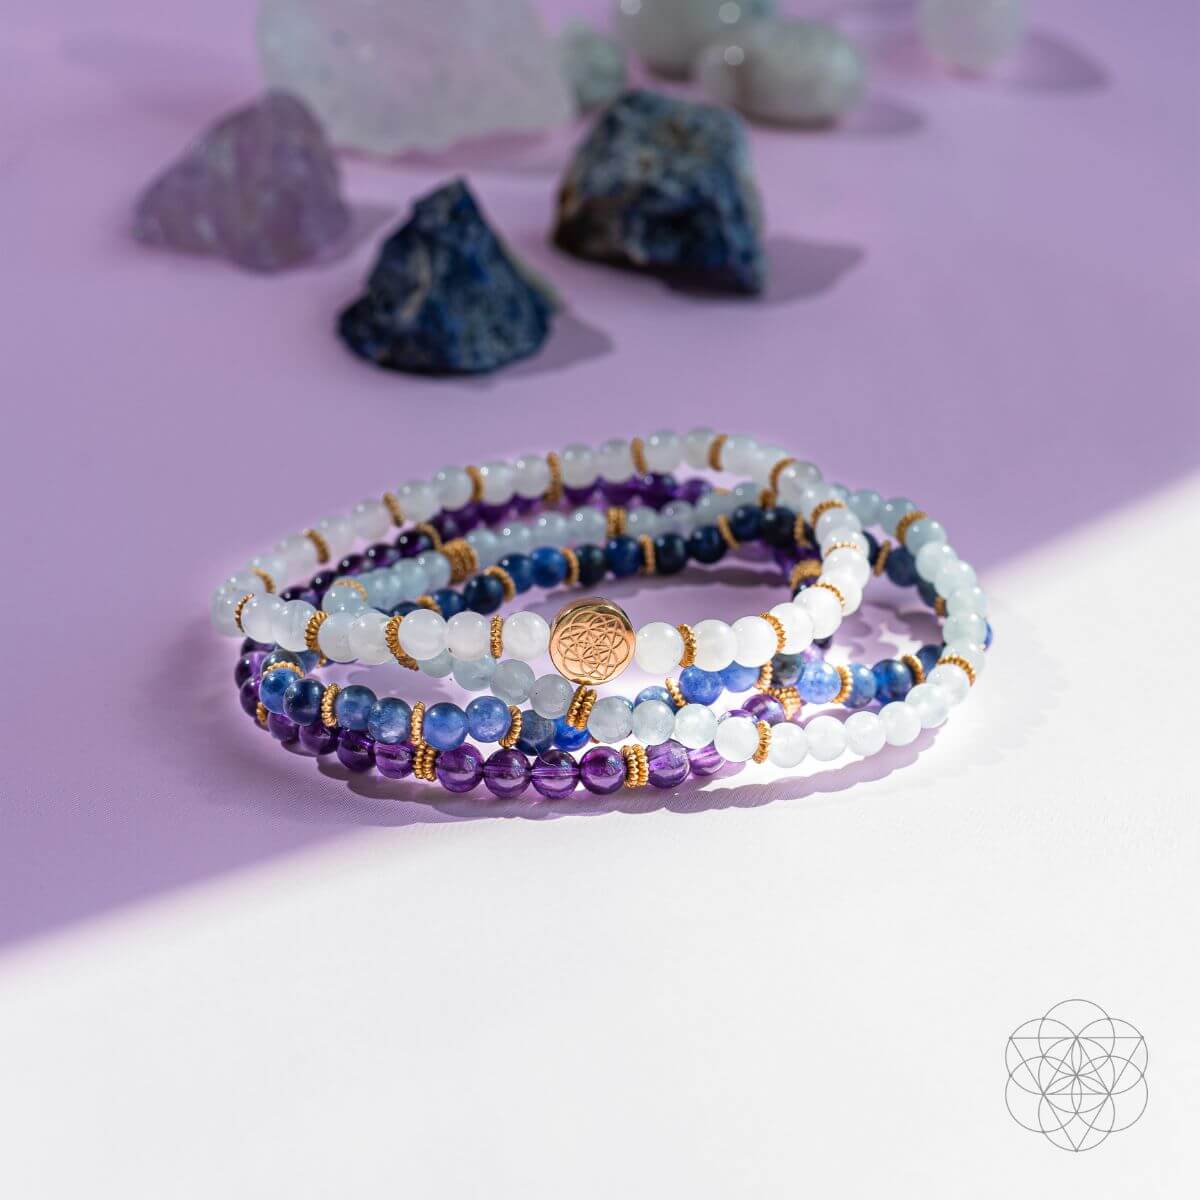 Anxiety” Crystal Healing Bracelet – By a Farmer's Daughter